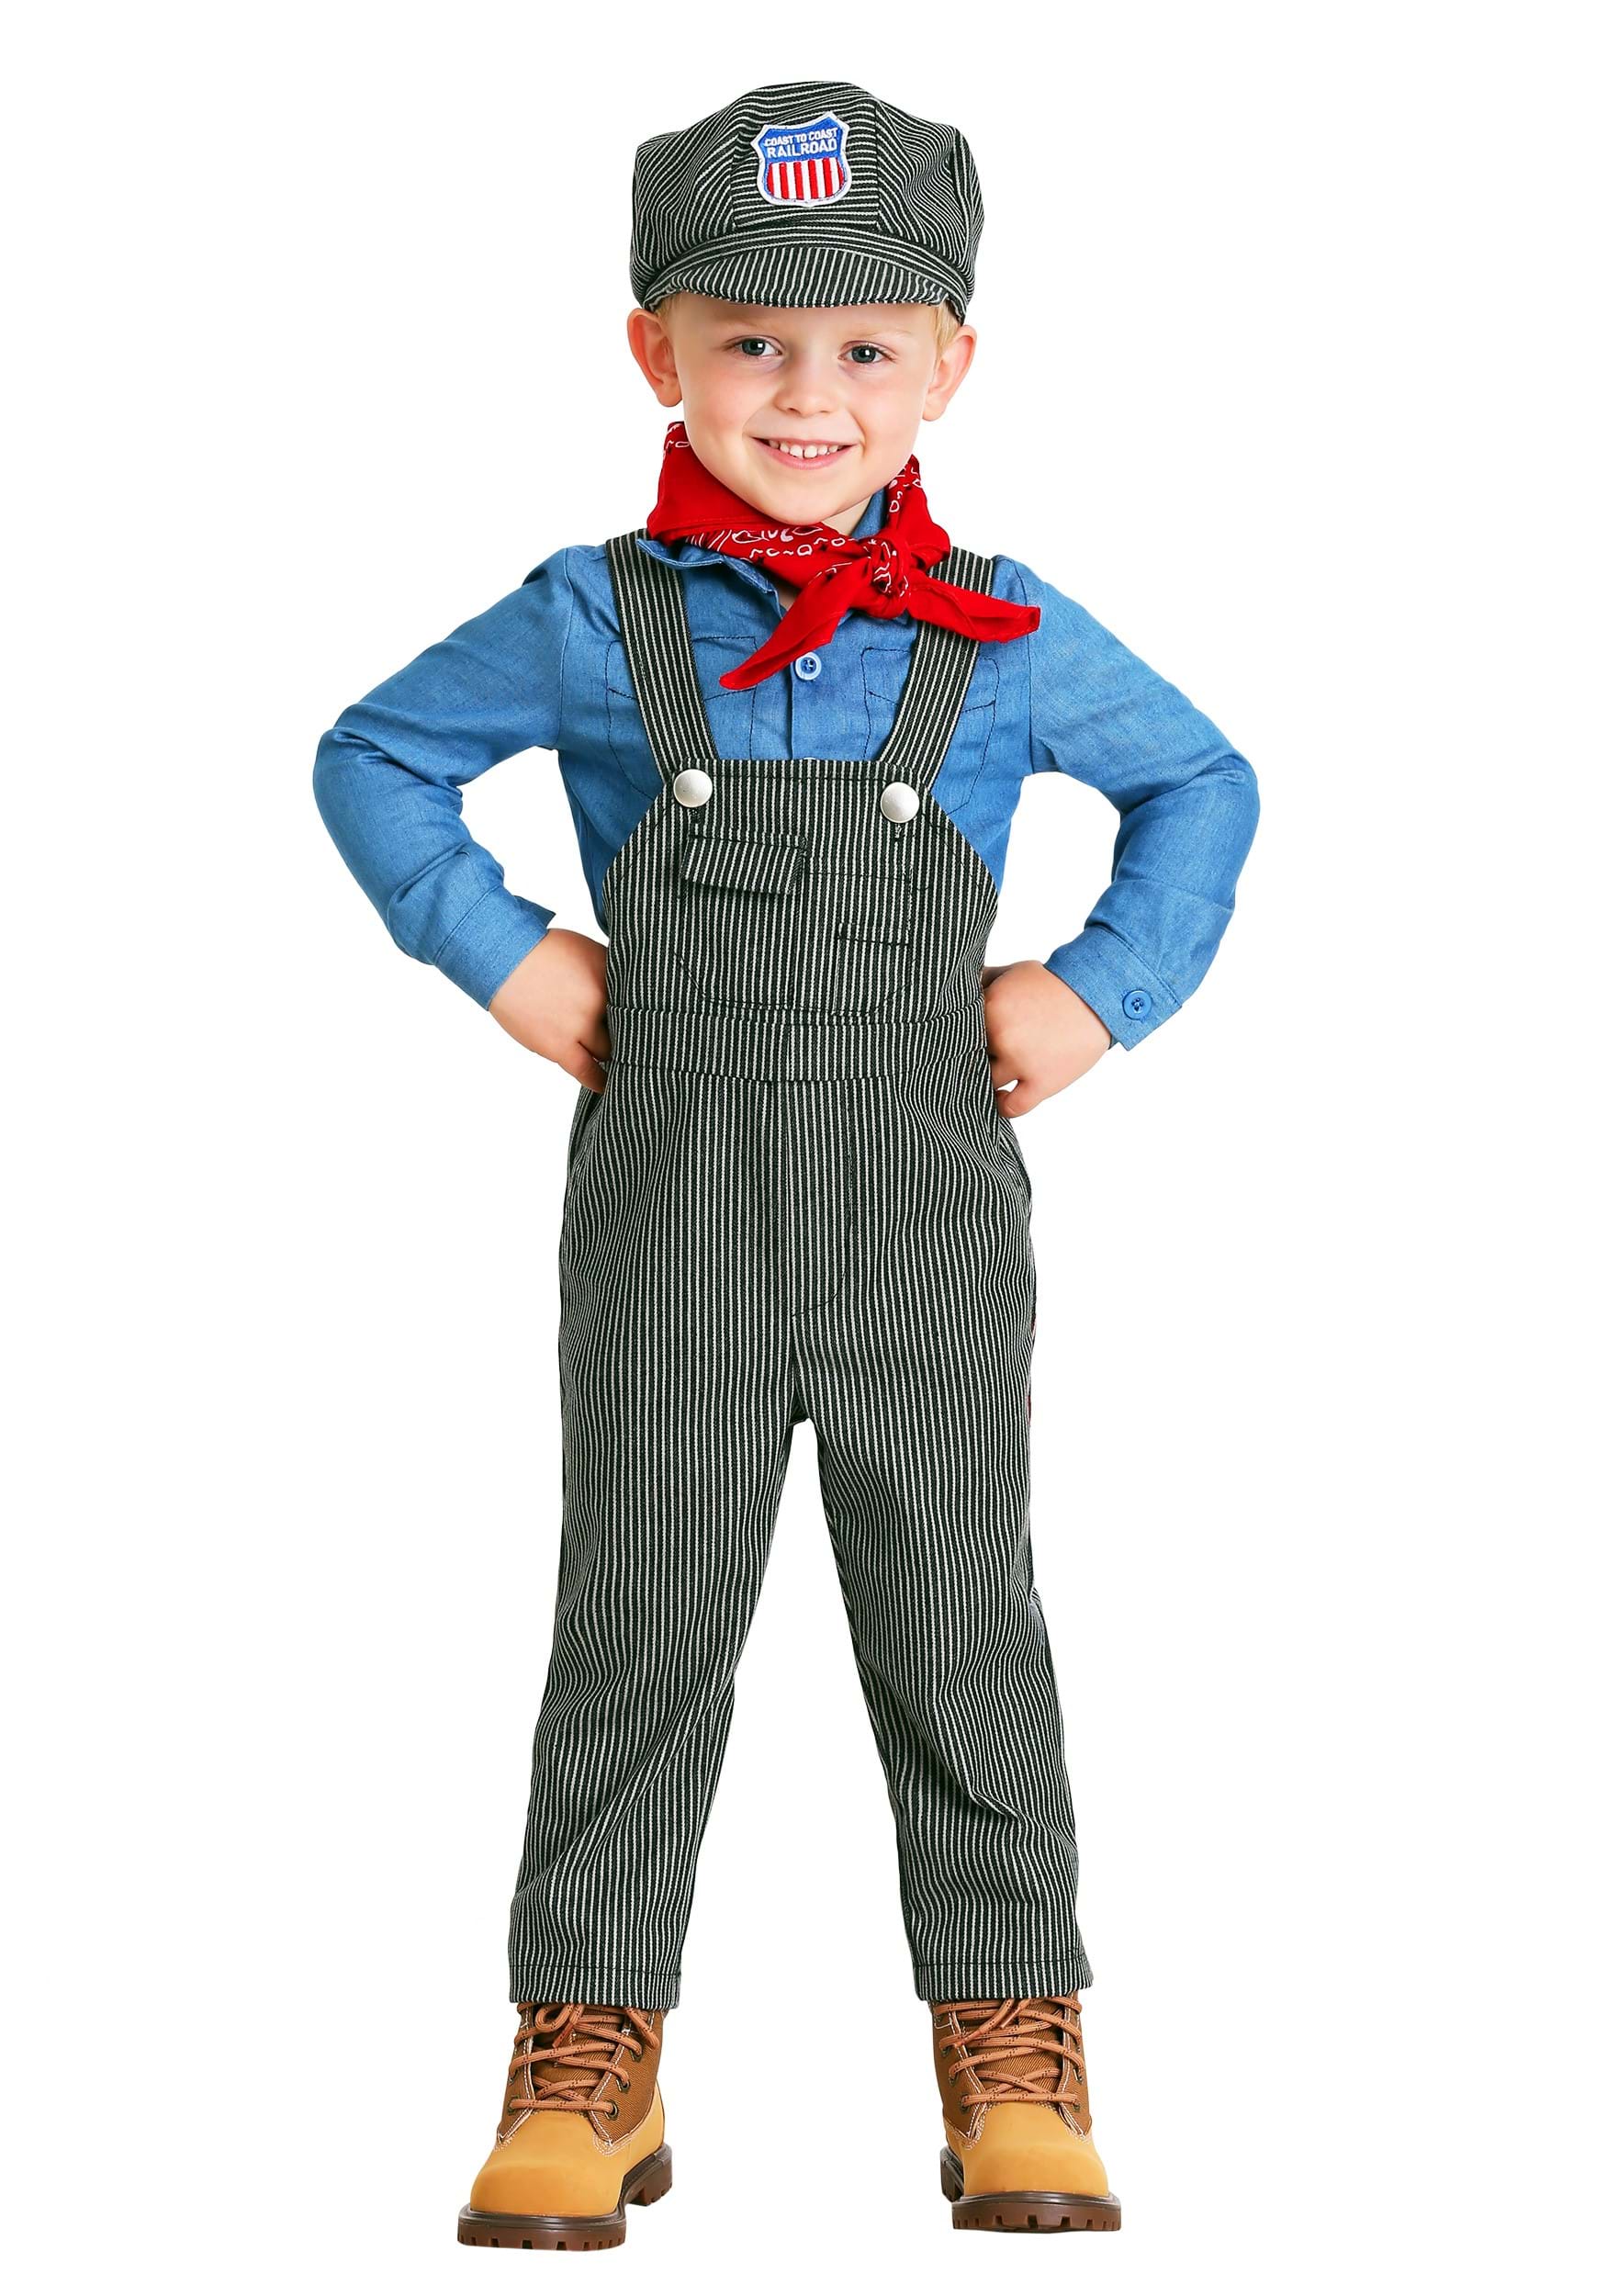 Photos - Fancy Dress ENGINEER FUN Costumes Train  Costume for Toddlers Black/Blue/Red 